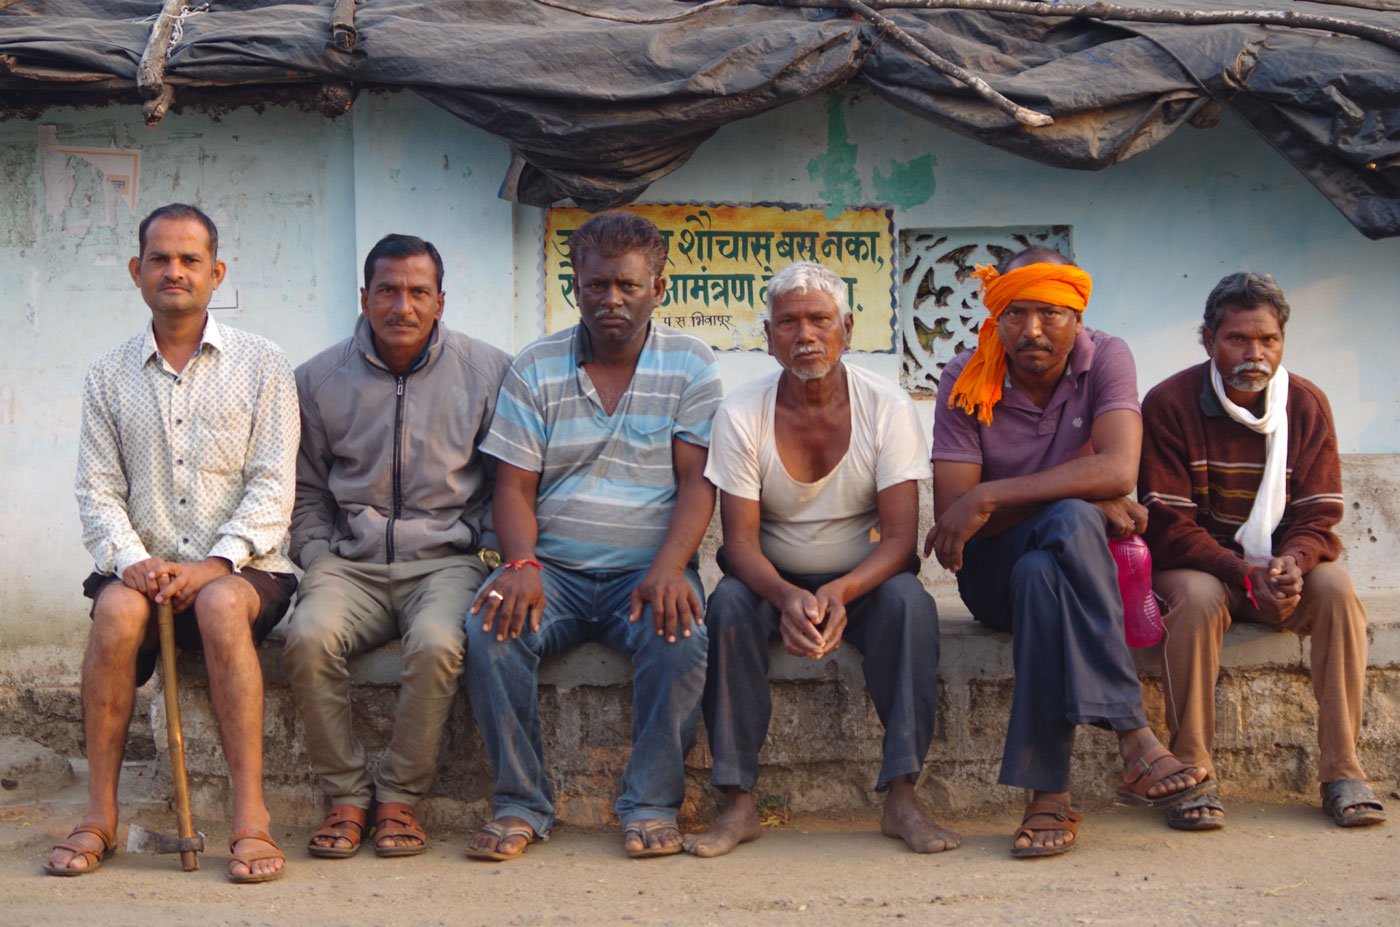 Gunwanta Gaikwad (second from right) and other villagers from Kholdoda prepare to leave for their farms for a night vigil